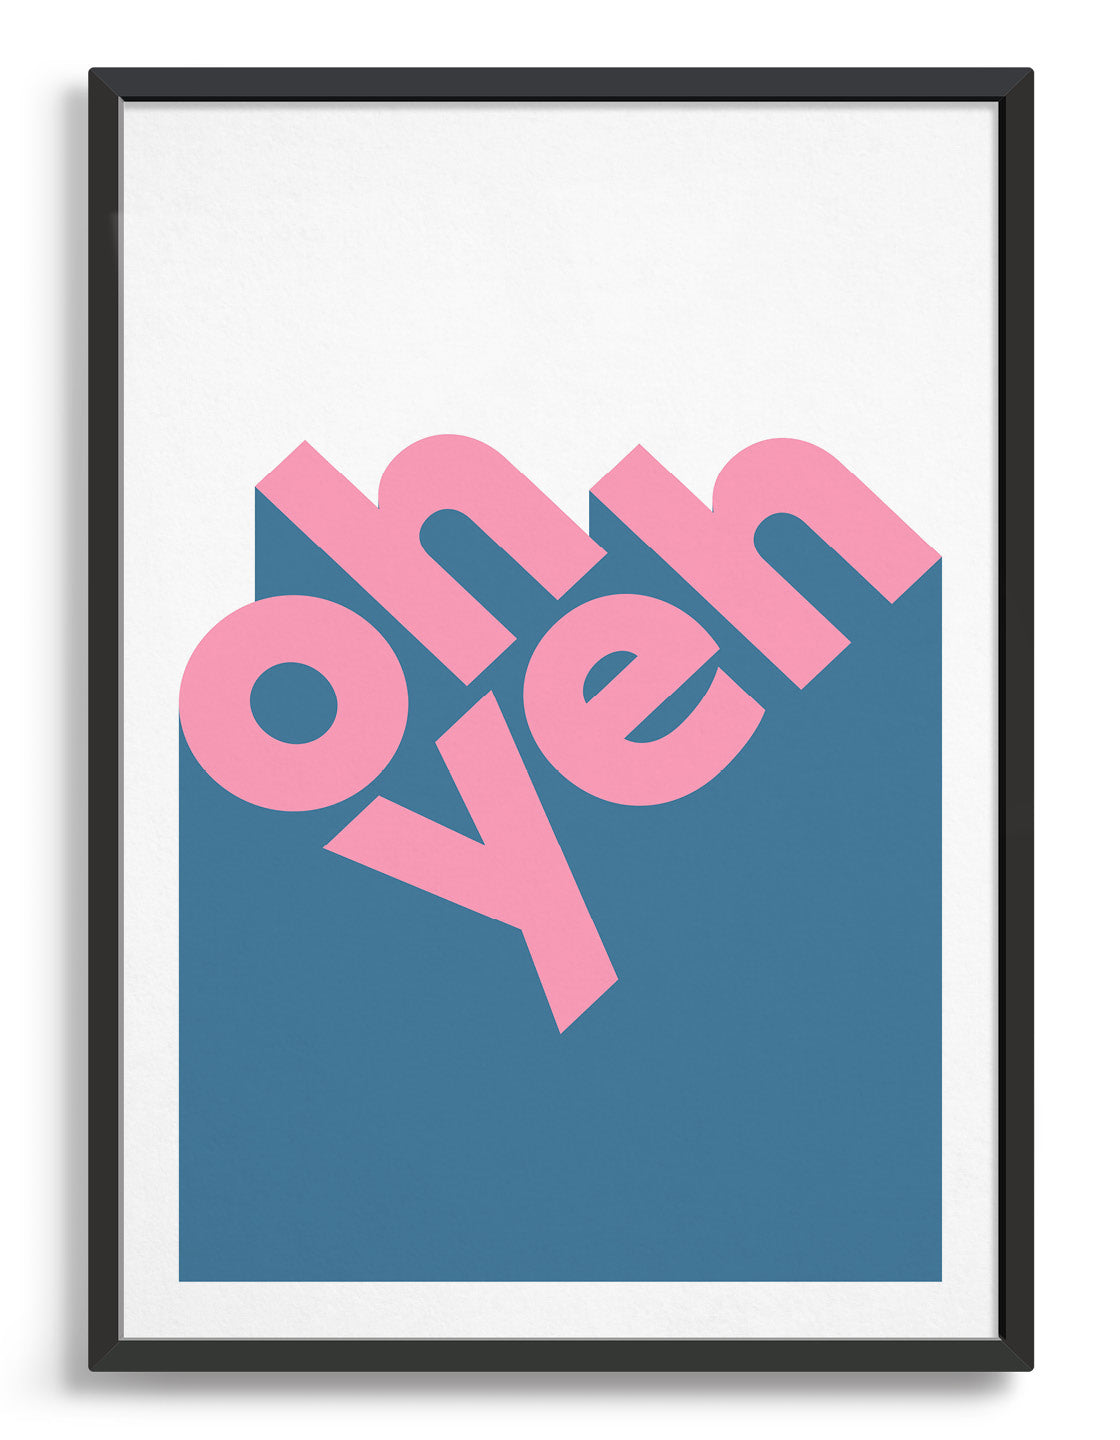 modern typography print with the words oh yeh in lower case pink text against a blue and white background